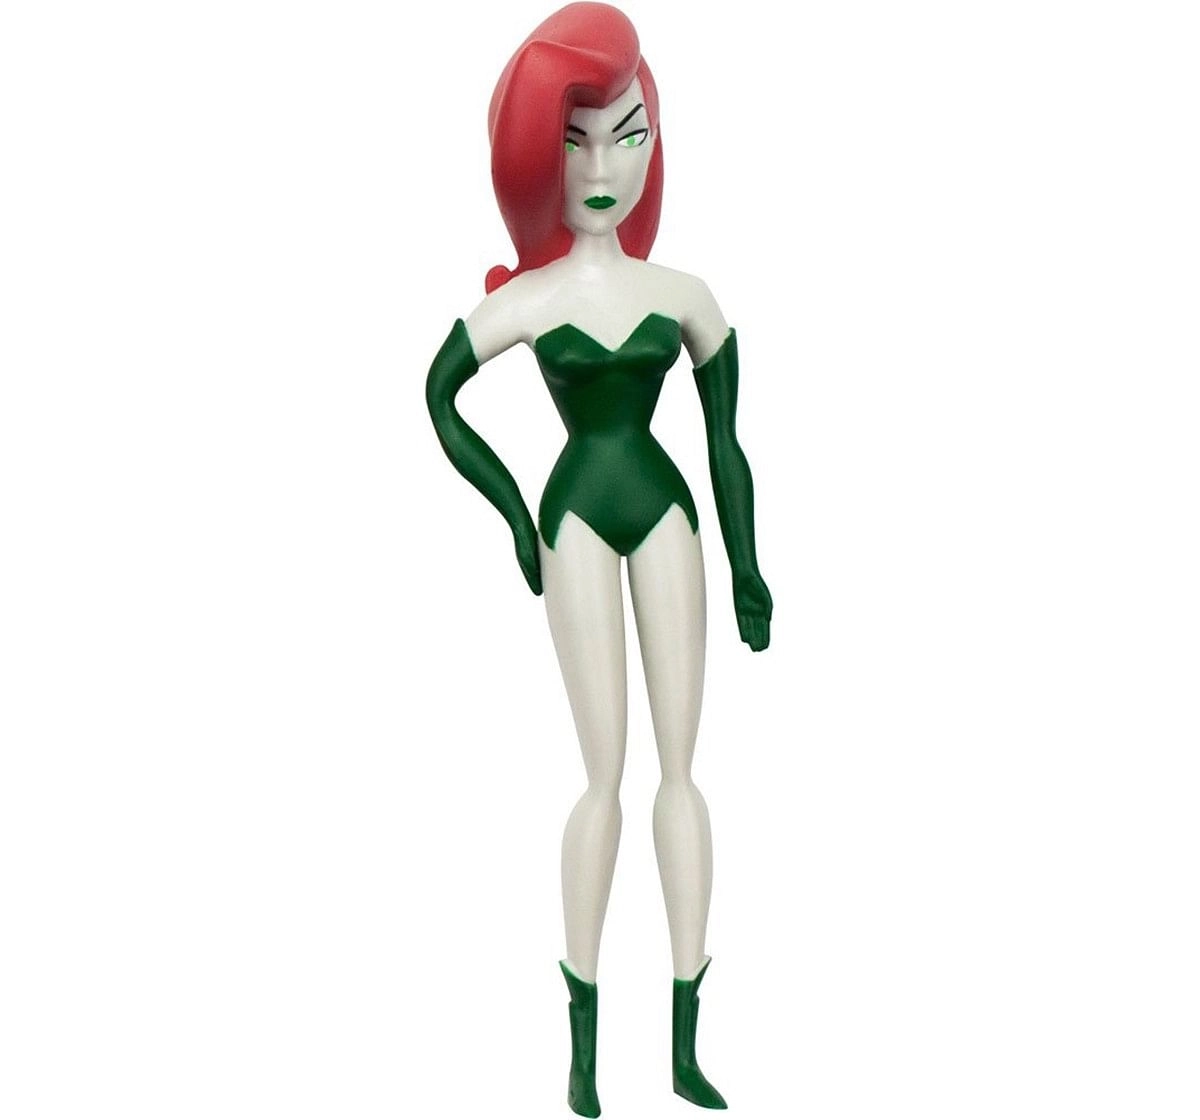 NJ Croce DC Poison Ivy Action Figure Toy for Kids age 3Y+ 